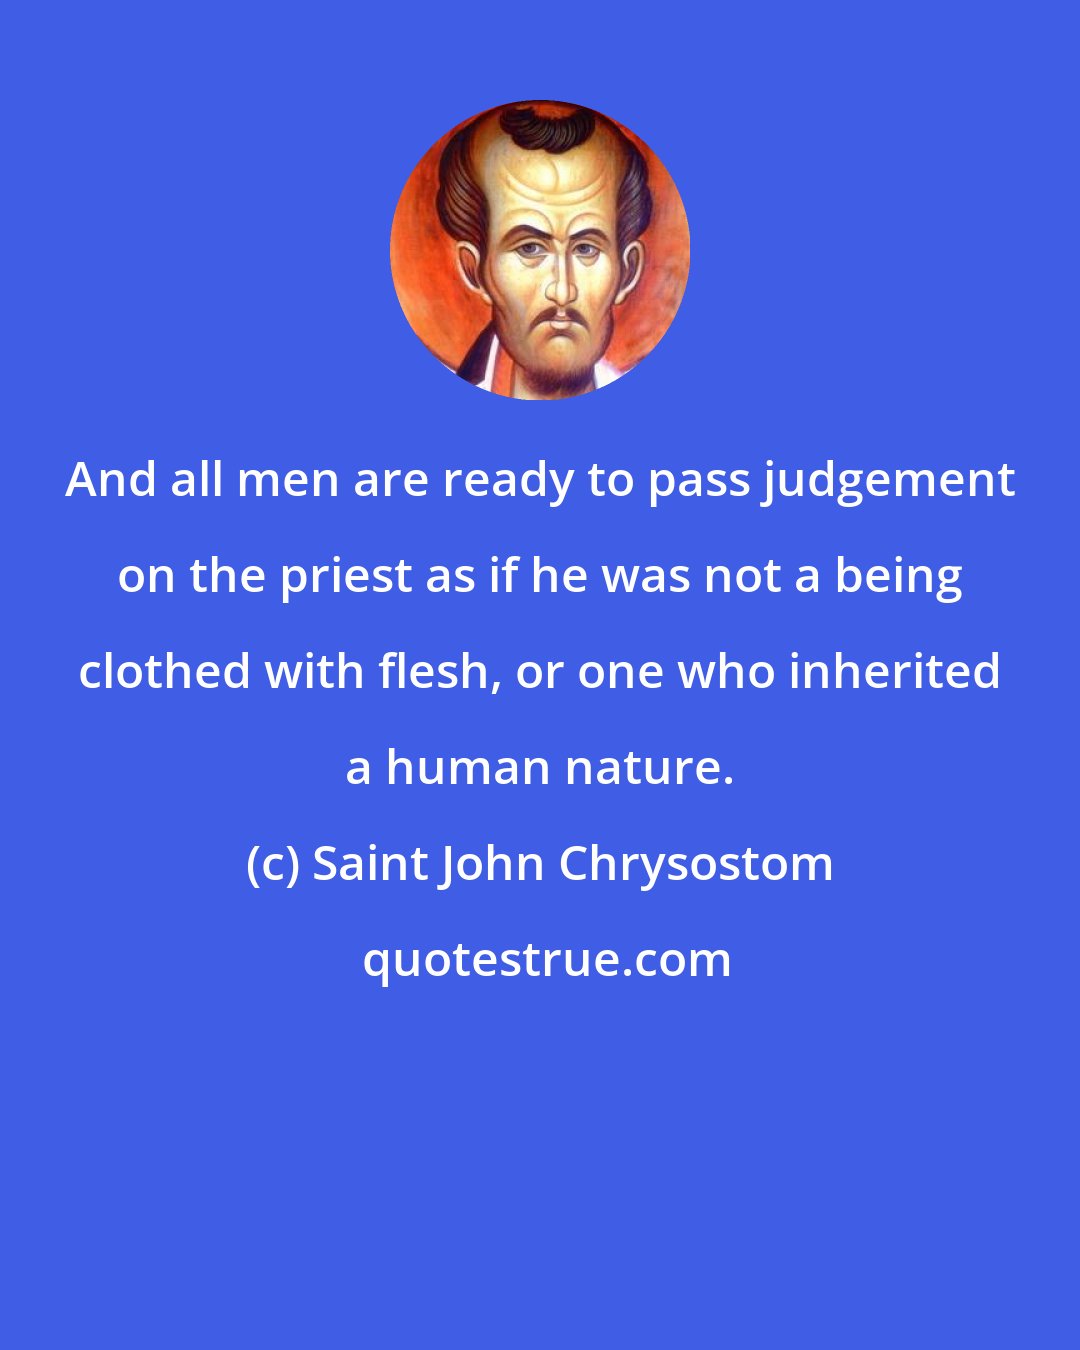 Saint John Chrysostom: And all men are ready to pass judgement on the priest as if he was not a being clothed with flesh, or one who inherited a human nature.